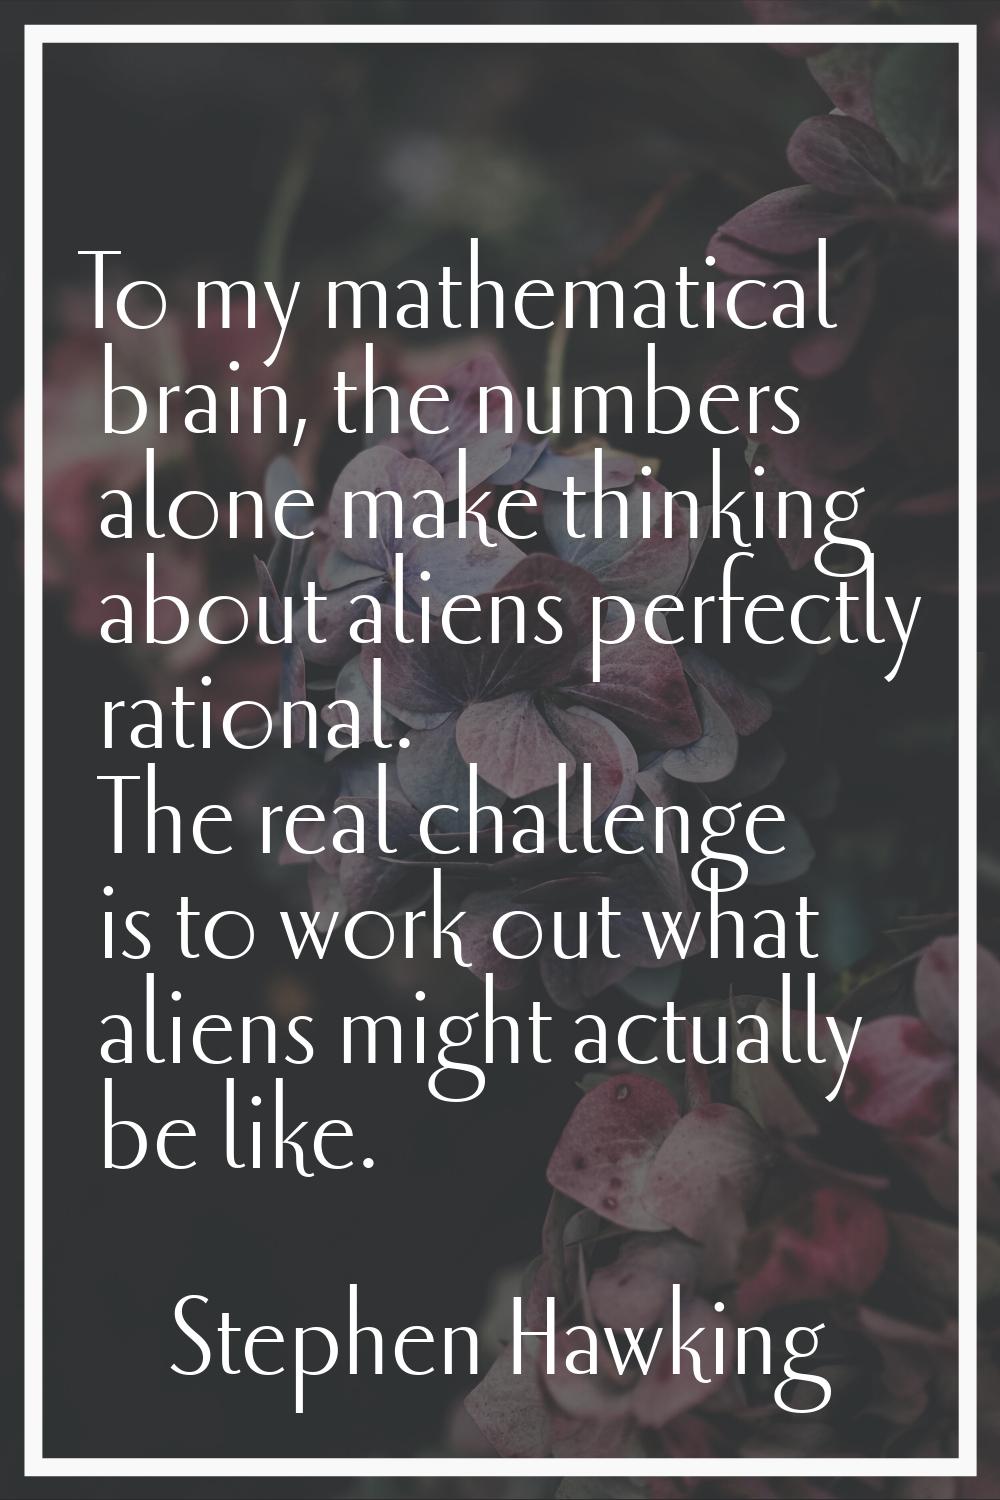 To my mathematical brain, the numbers alone make thinking about aliens perfectly rational. The real